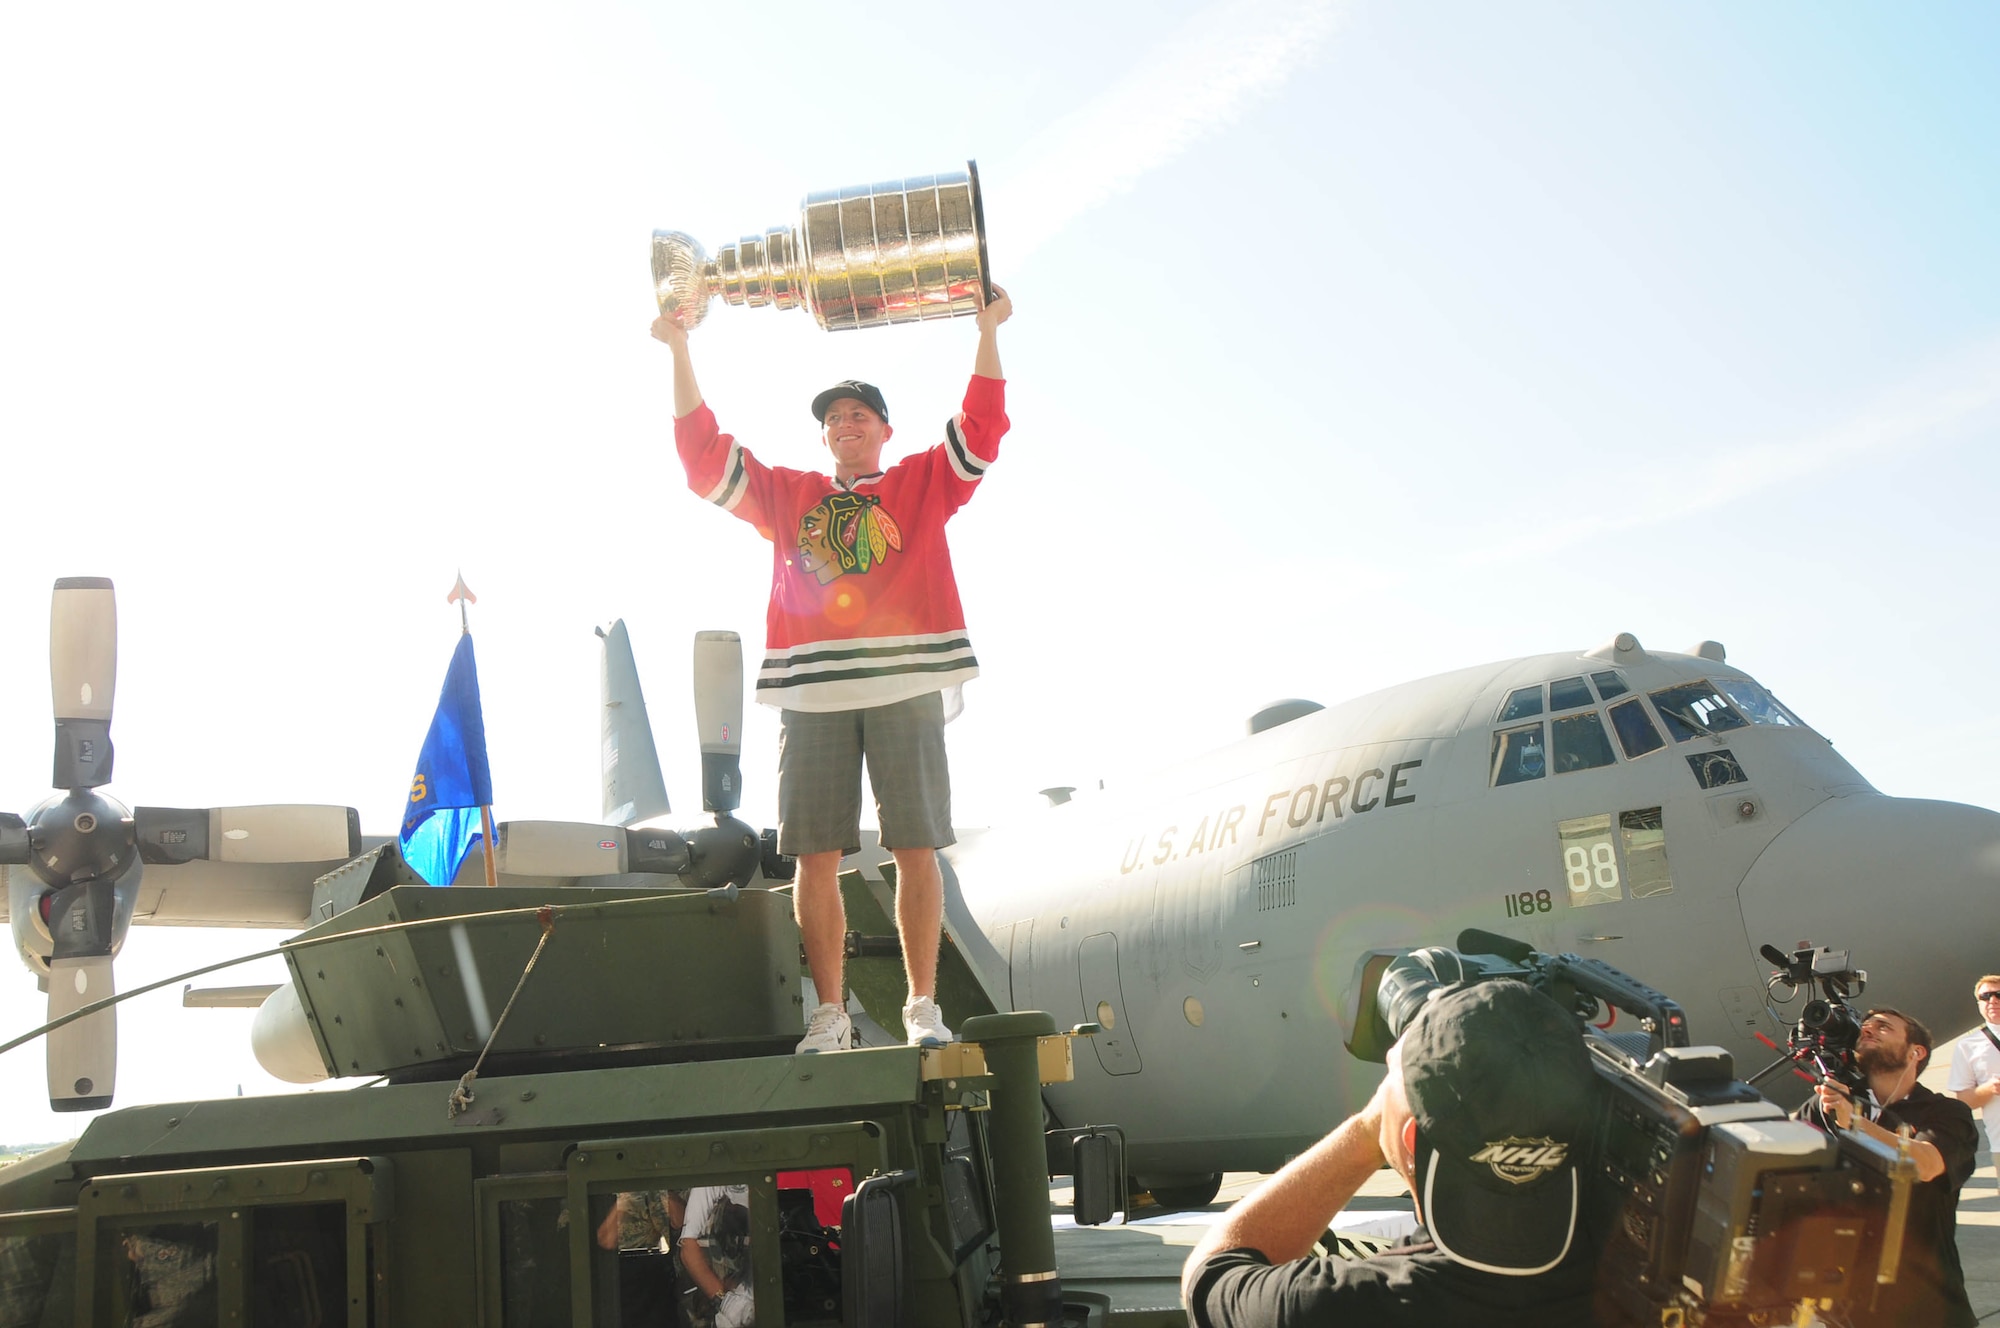 Chicago Blackhawks right wing Patrick Kane holds up the Stanley cup in front of the C-130 aircraft just before entering the hangar to greet members of the military at the Niagara Falls Air Reserve Station on Aug. 24, 2013 (Air National Guard Photo/ Senior Master Sgt. Ray Lloyd)